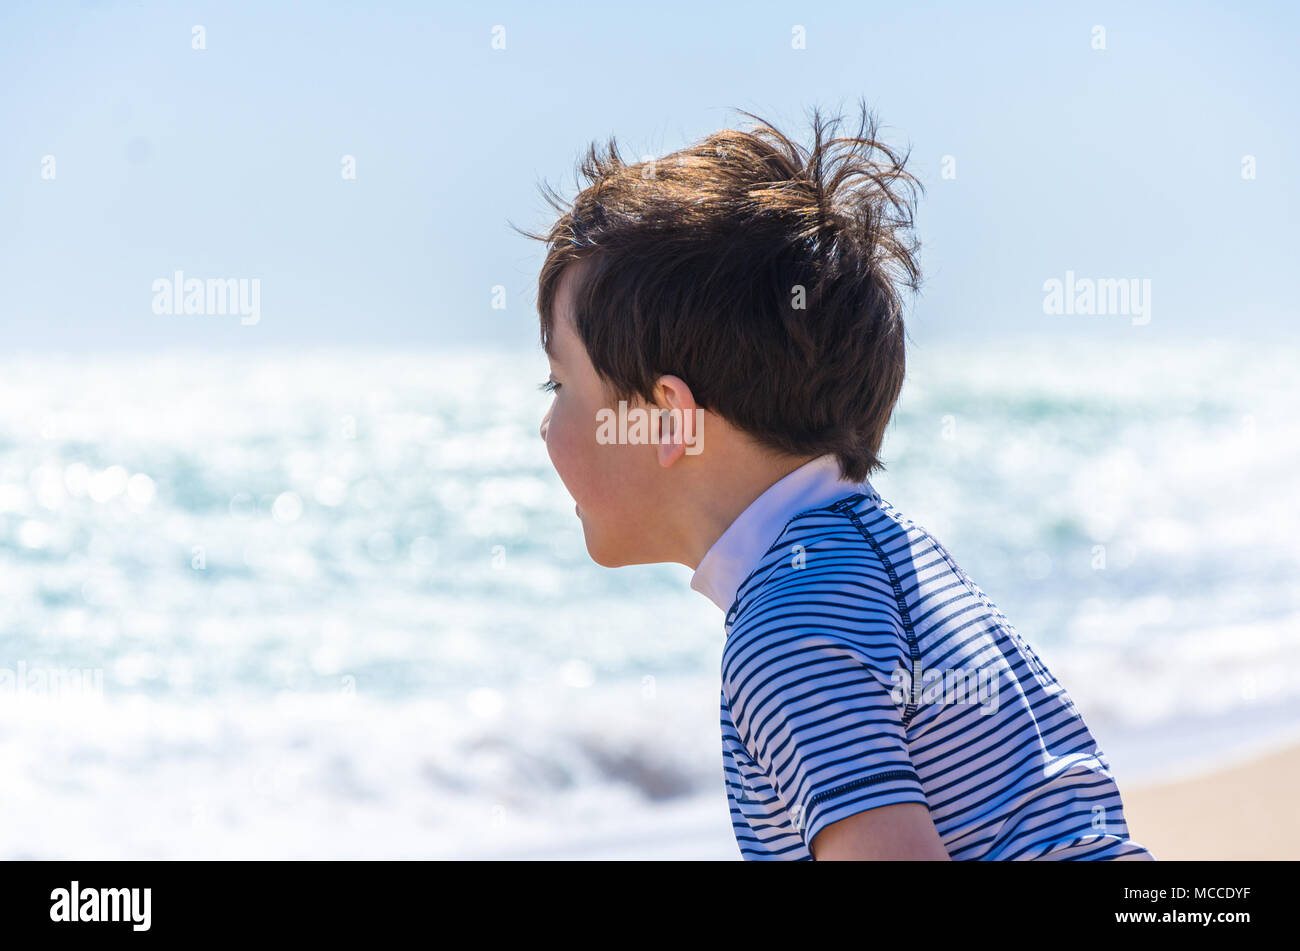 A young child plays on a beach close to the waves which roll in on the sand. Stock Photo